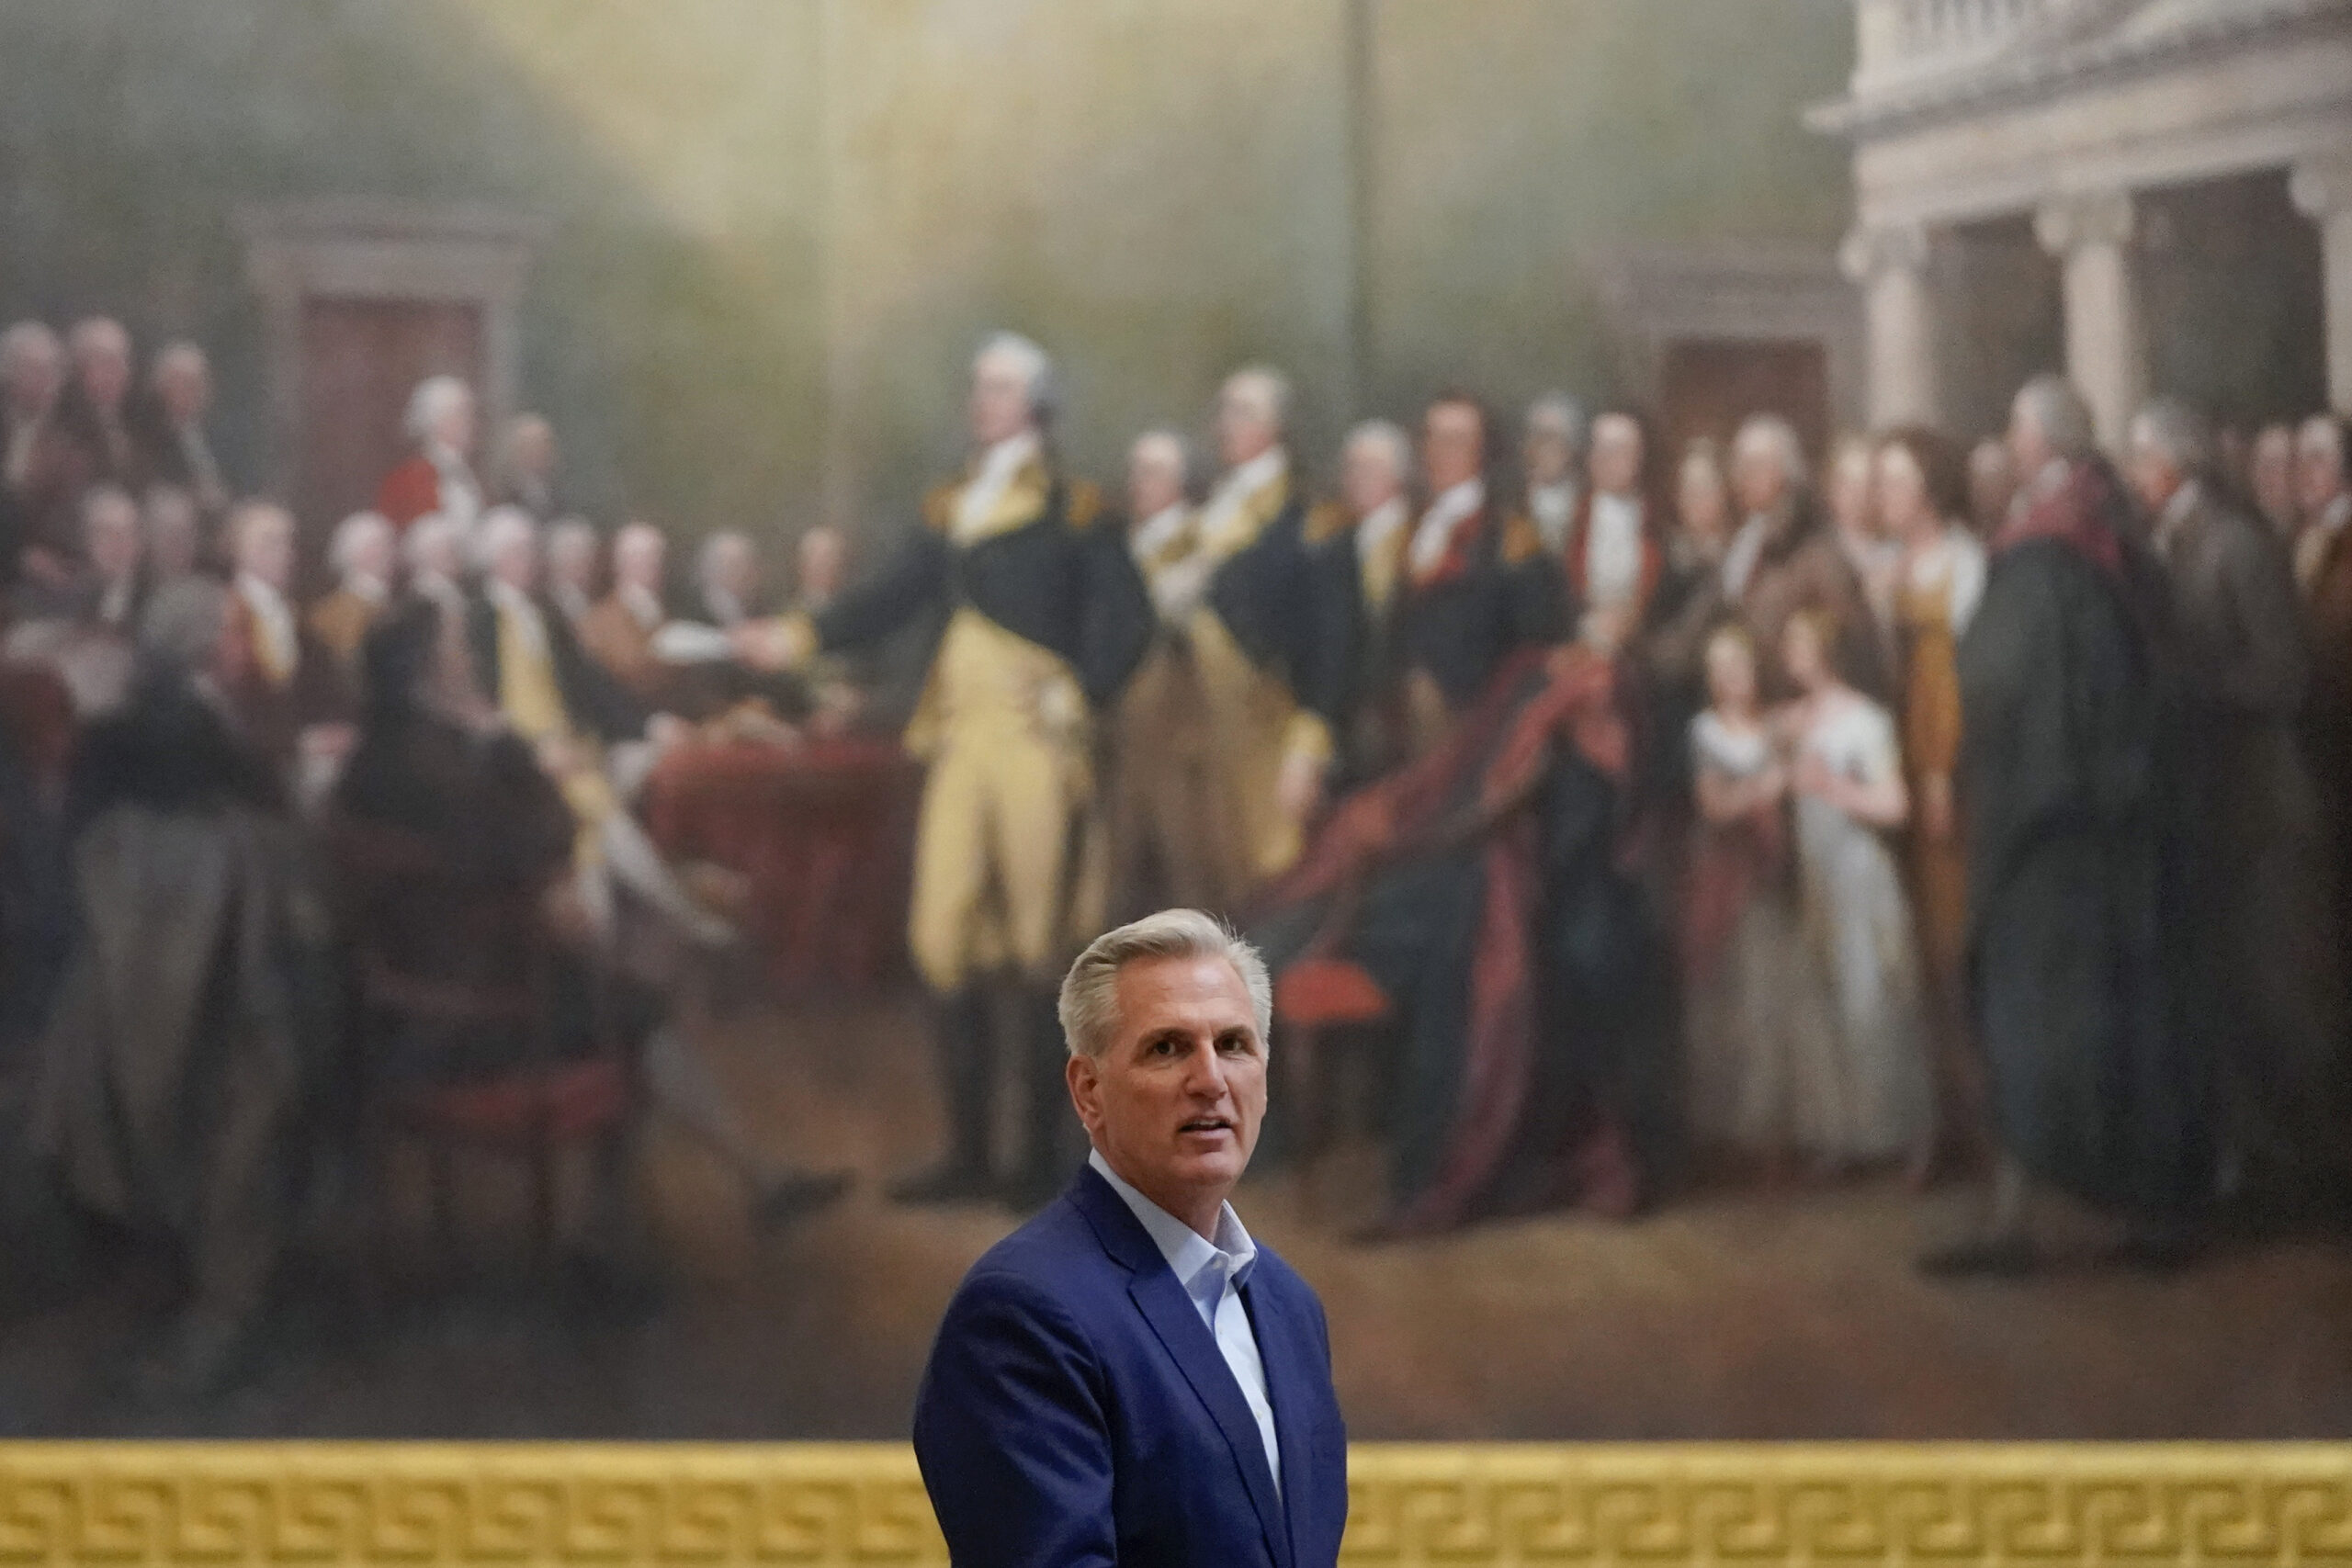 Speaker of the House Kevin McCarthy, R-Calif., walks in the Capitol Rotunda on Capitol Hill in Wash...